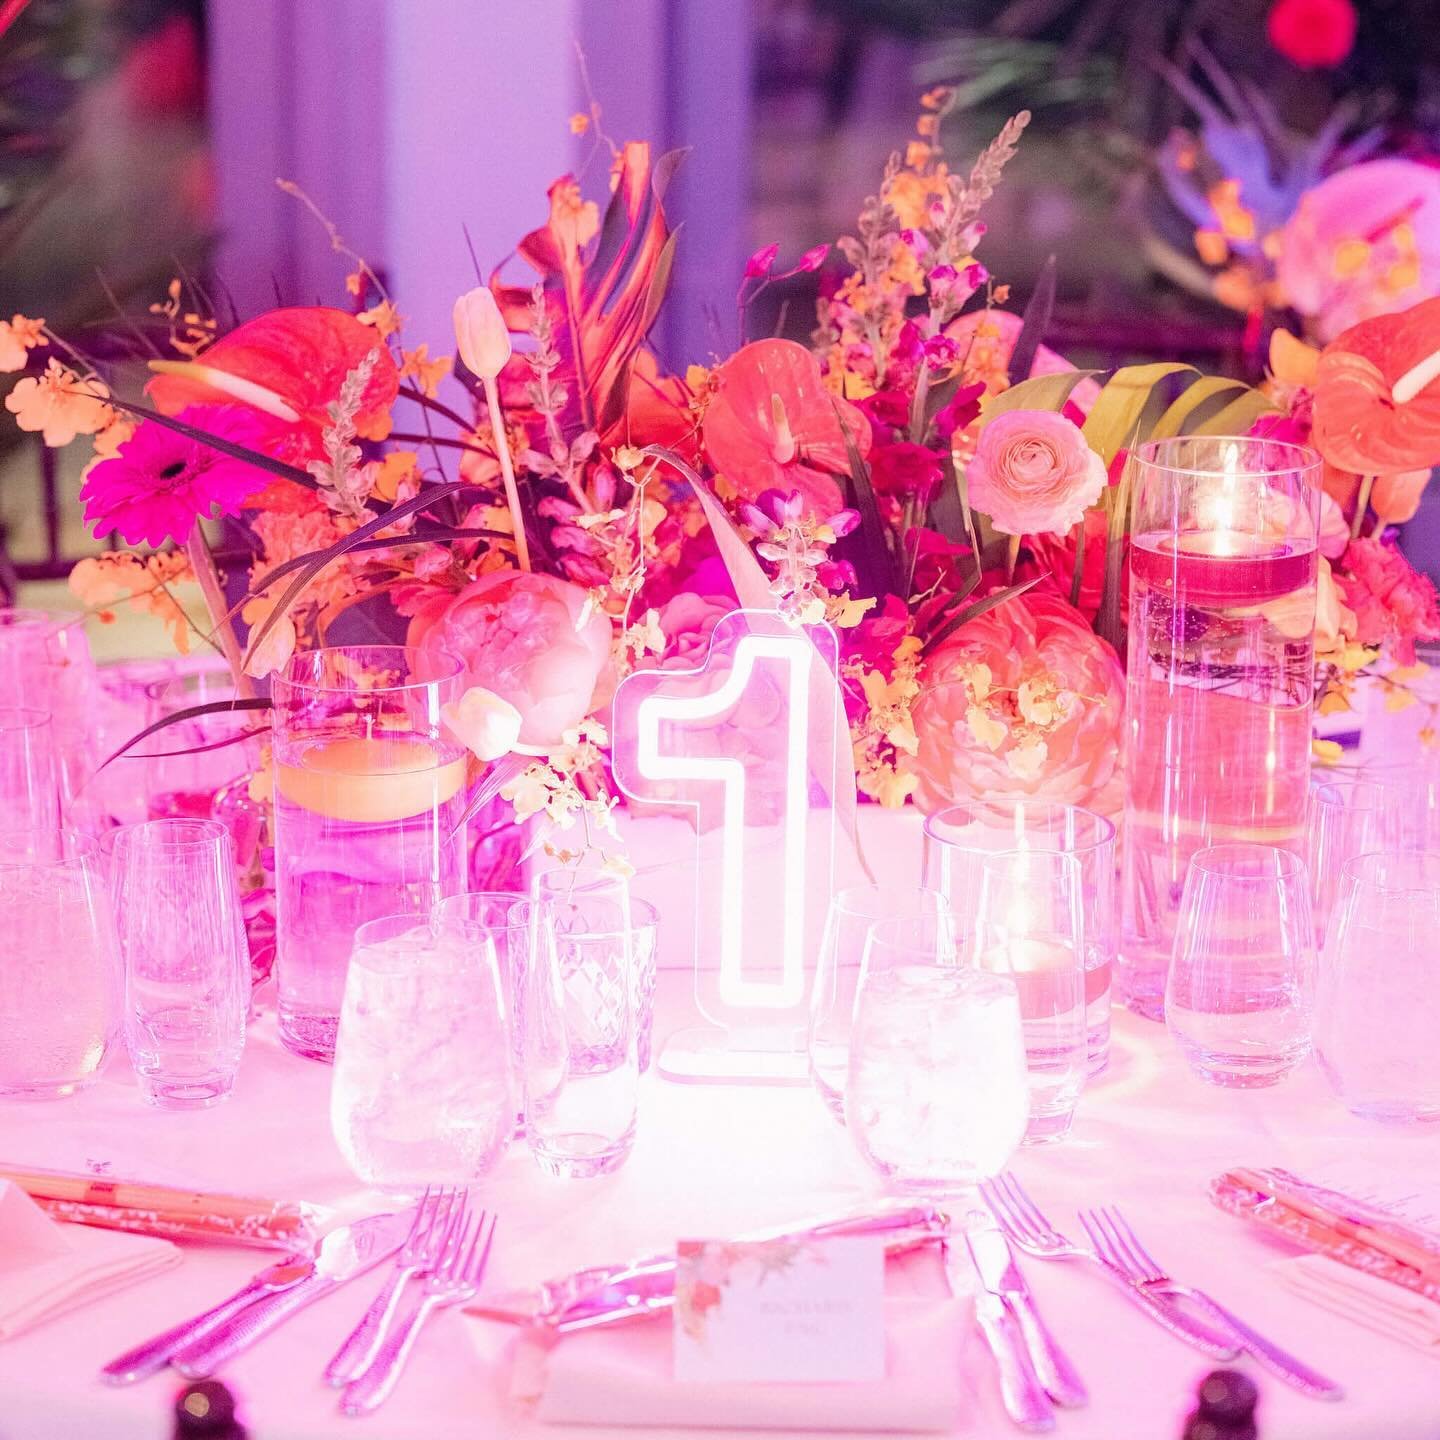 tropical paradise at the waterfront 🌴

planning + production: @otherworldevents
photography: @haseokchungstudio
floral: @lulo_floral
rentals: @mimosafloral
h+mu: @vickyc5ny
catering + cake: @masterpiececaterers
soft serve: @softswervenyc
music: @viv